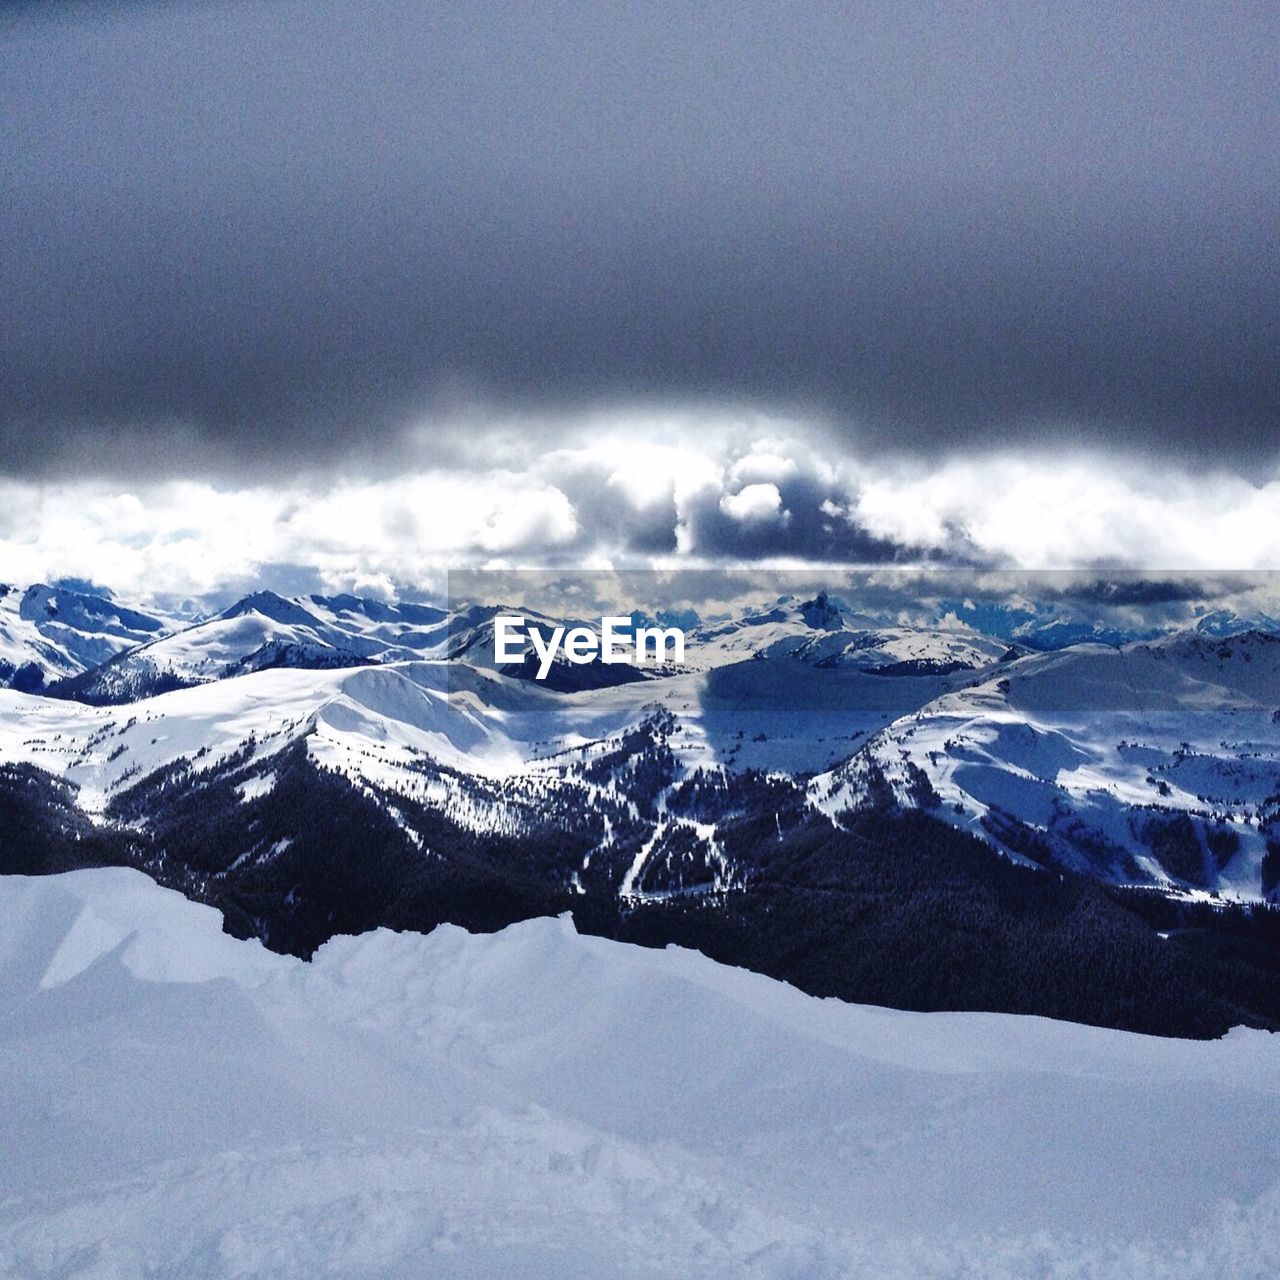 SNOW COVERED MOUNTAINS AGAINST CLOUDY SKY